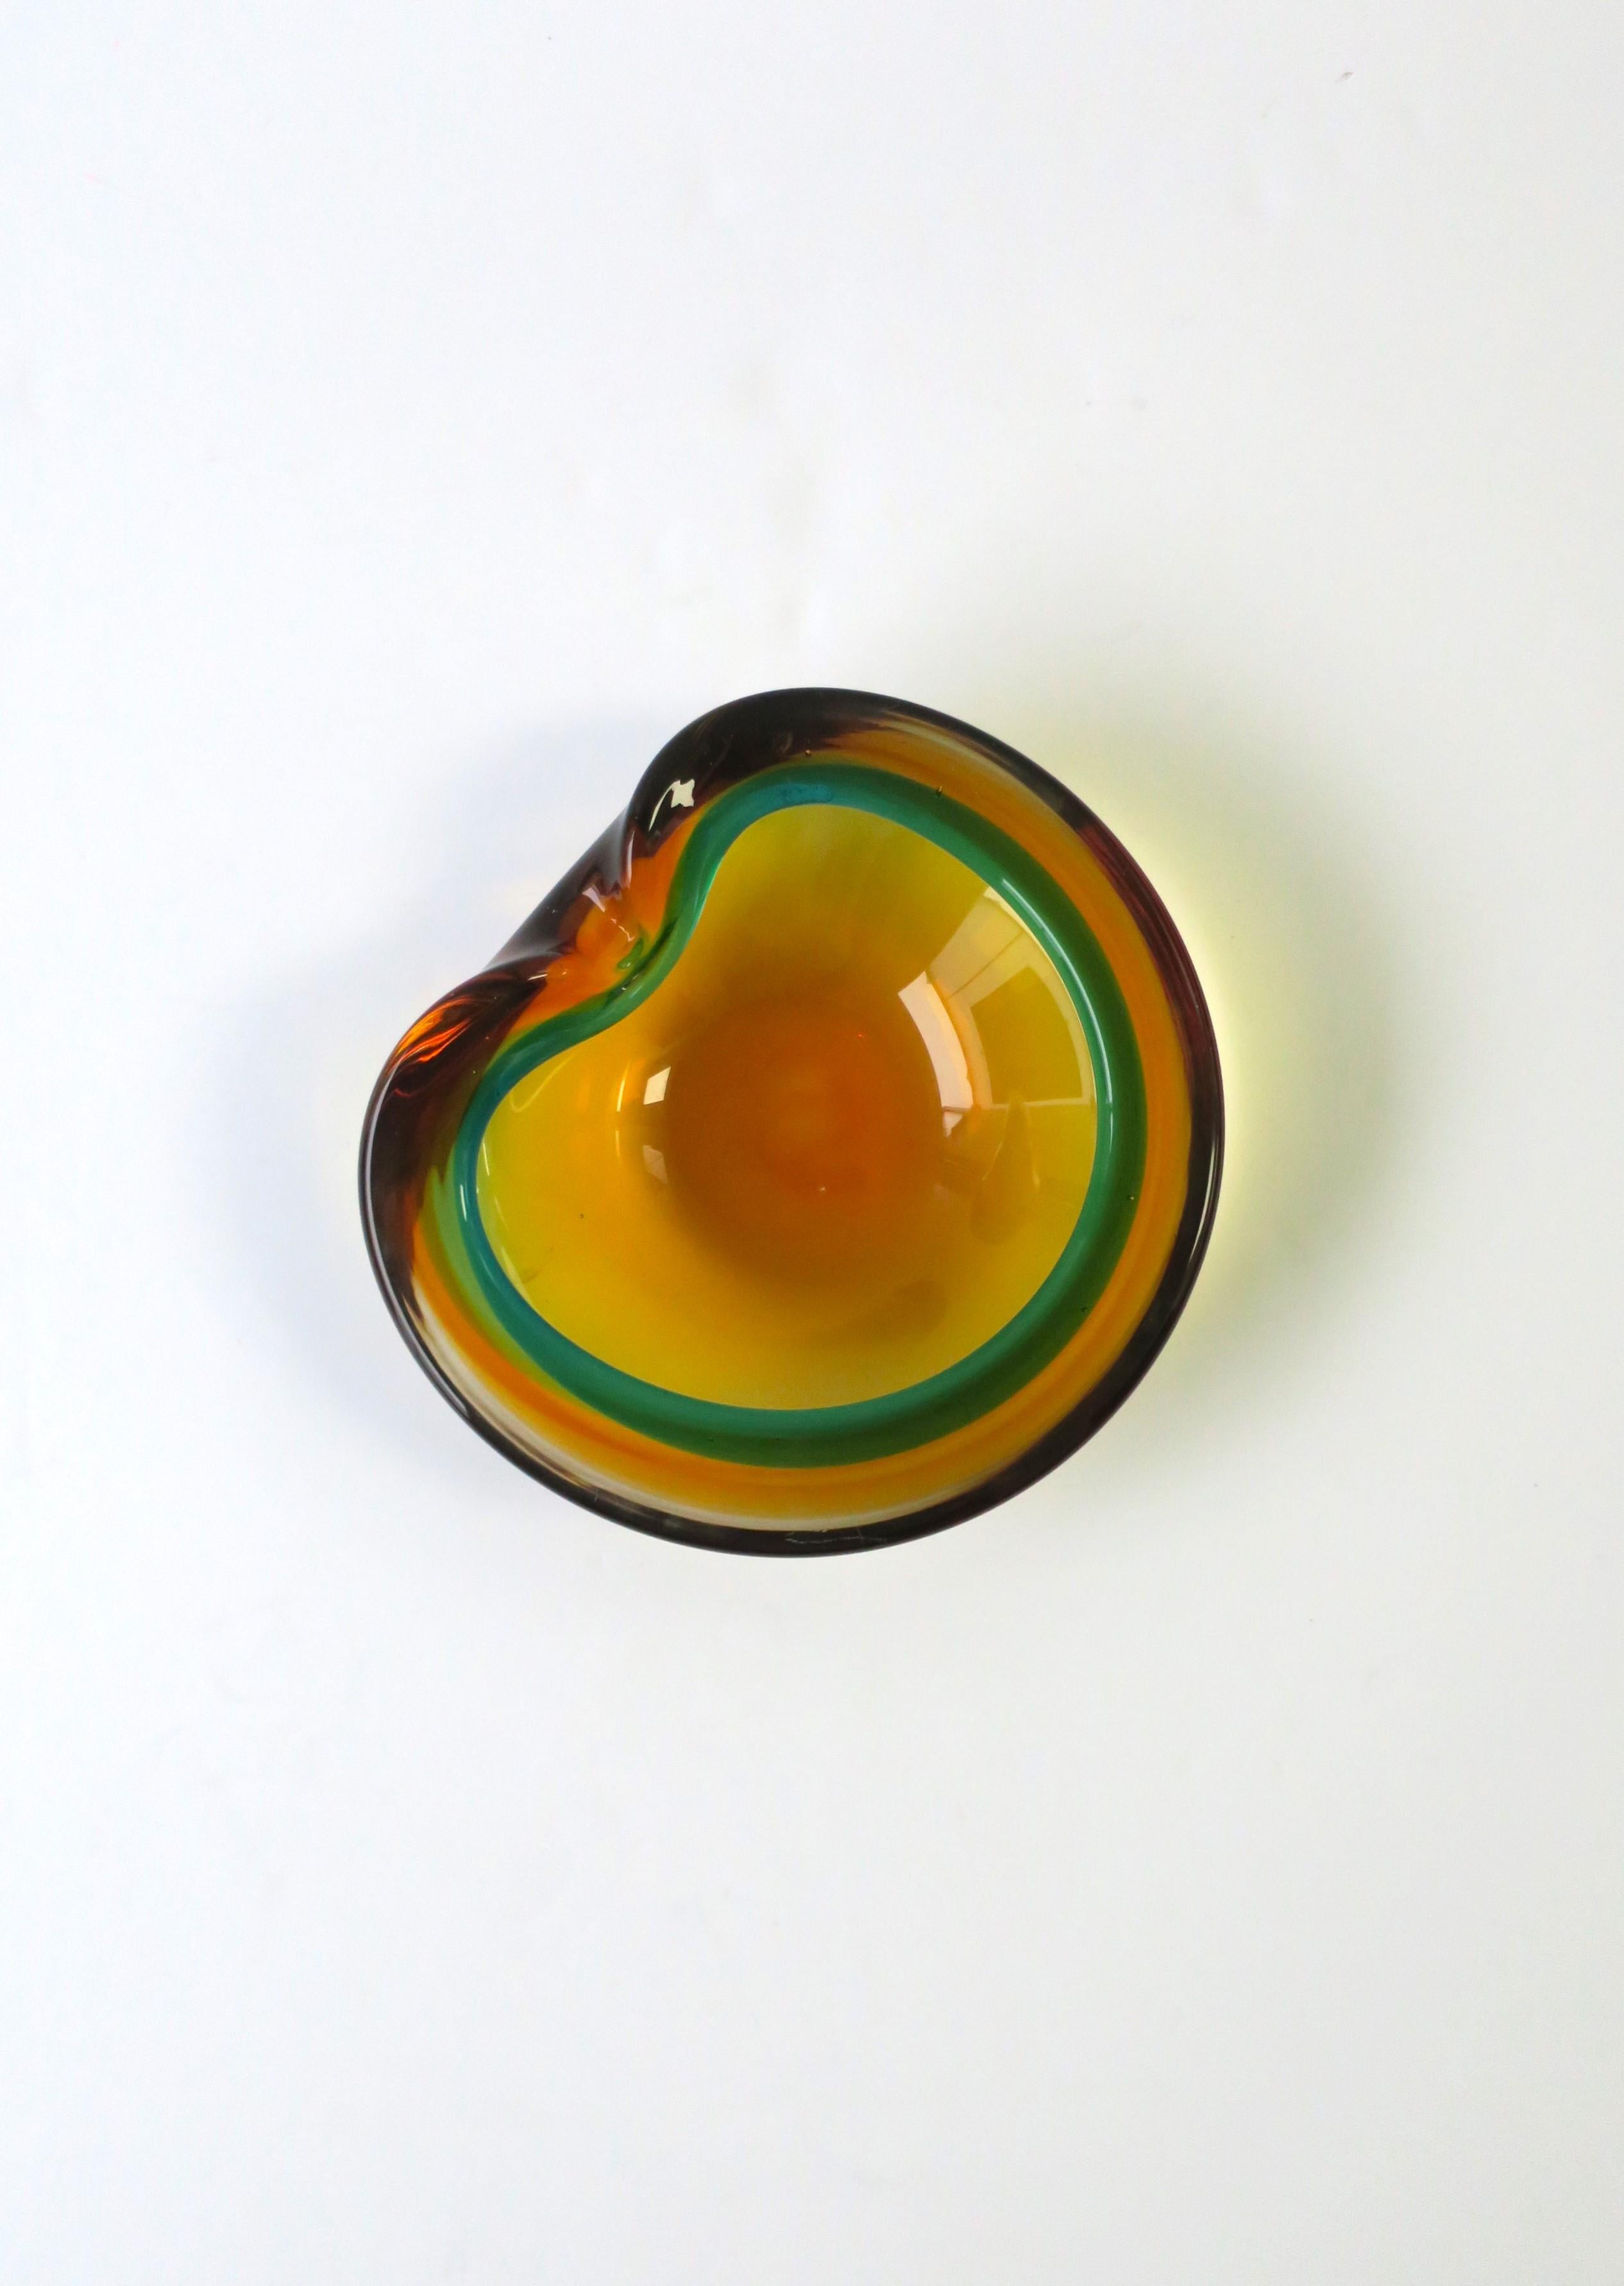 Mid-Century Modern Italian Murano Sommerso Bowl in Saffron Yellow and Kelly Green Art Glass